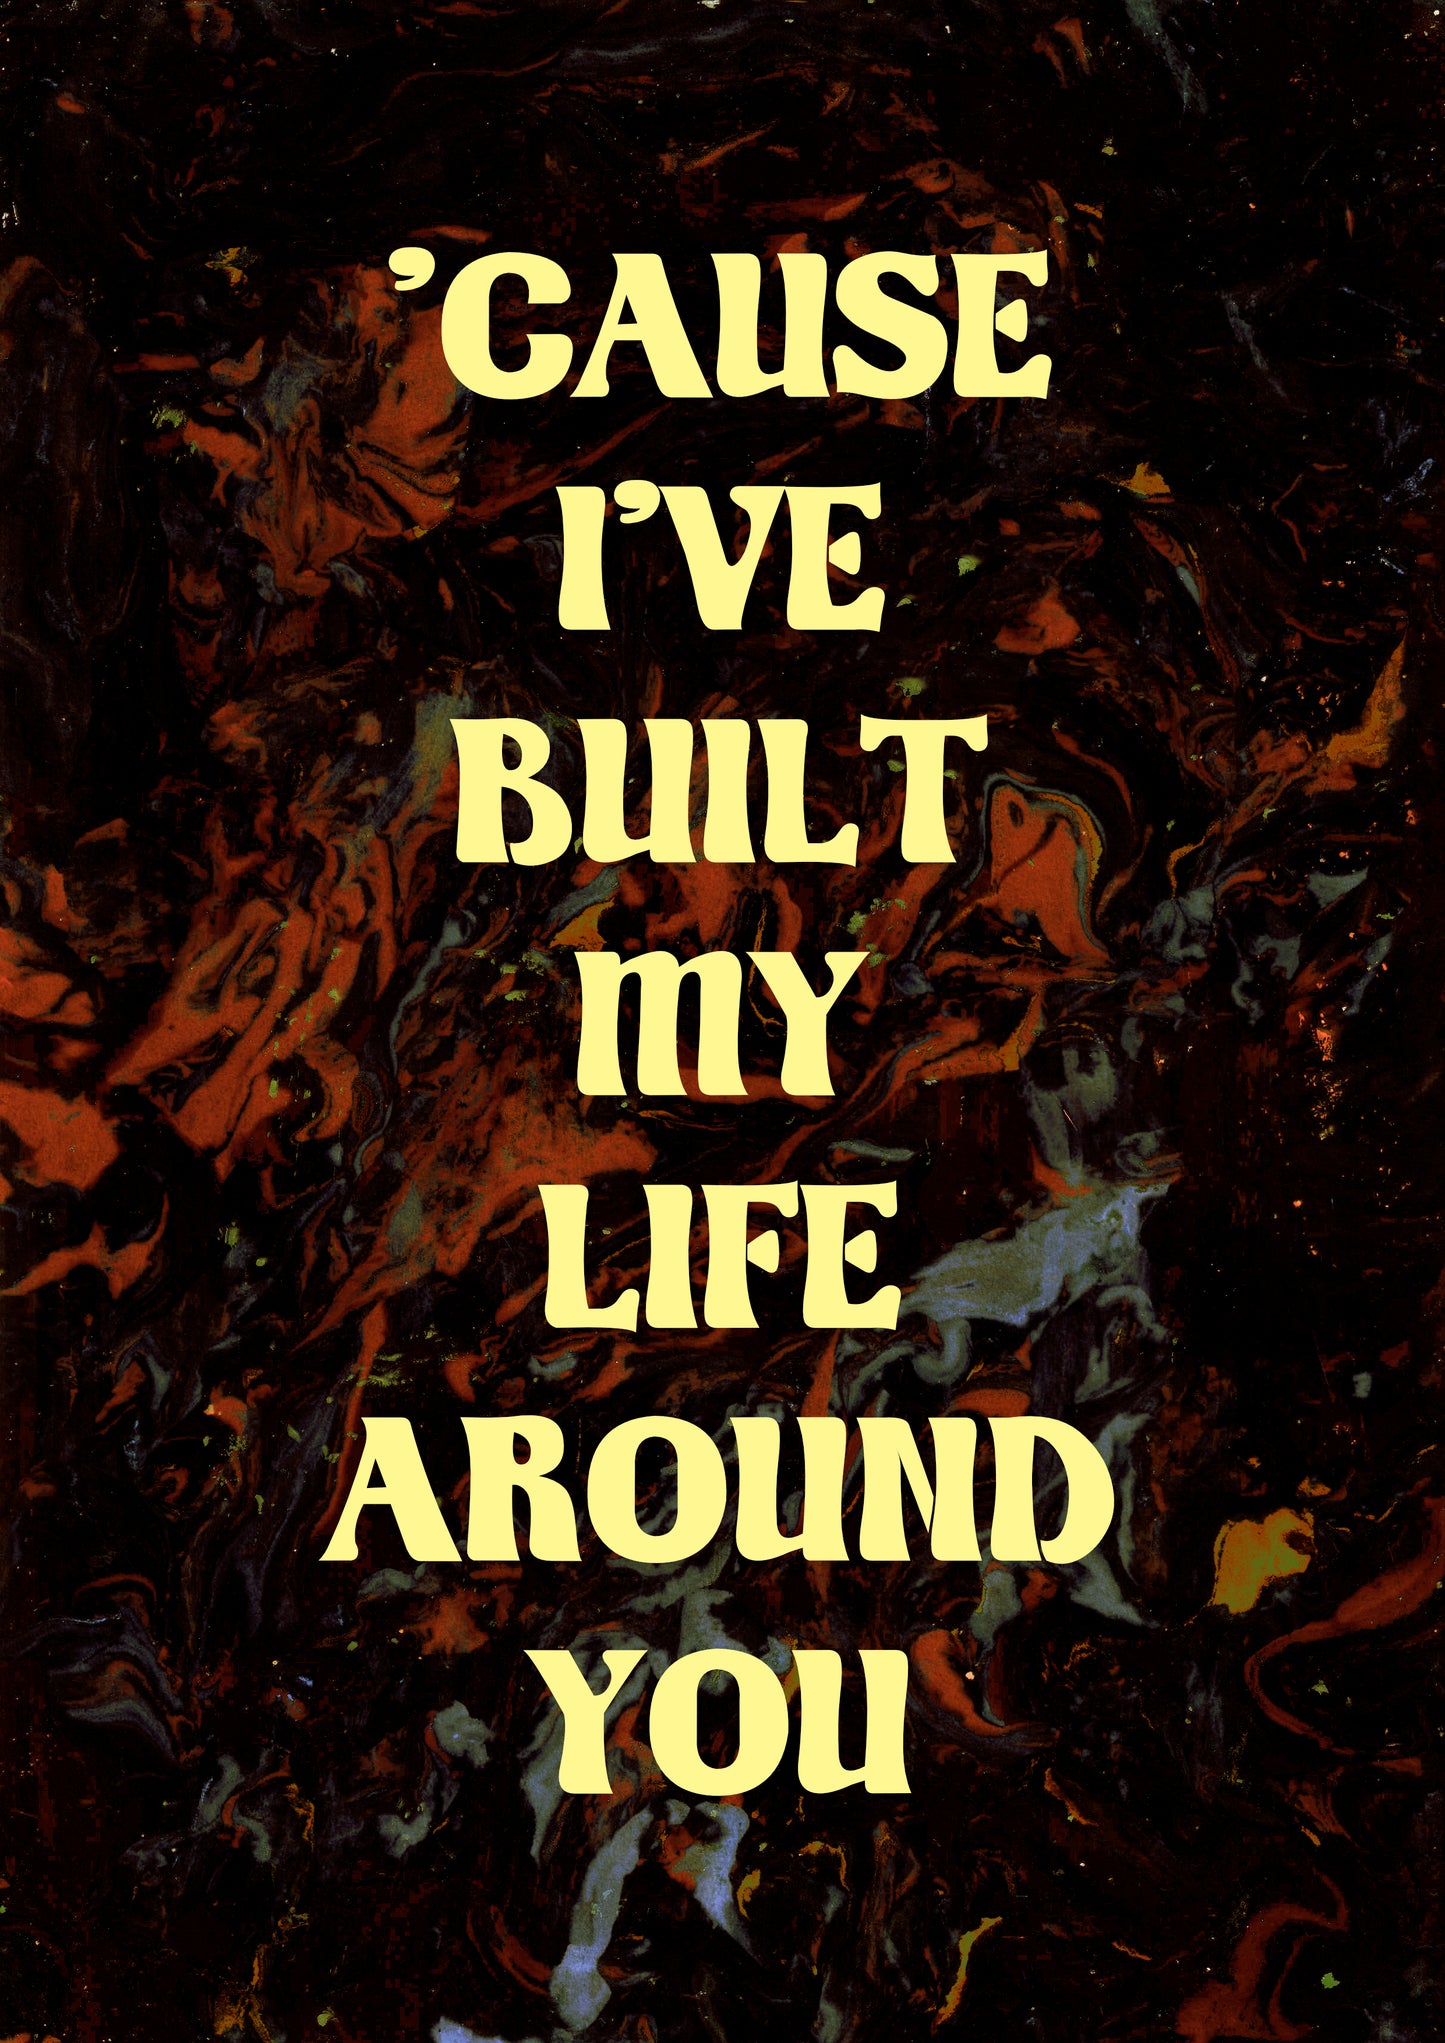 'CAUSE I'VE BUILT MY LIFE AROUND YOU